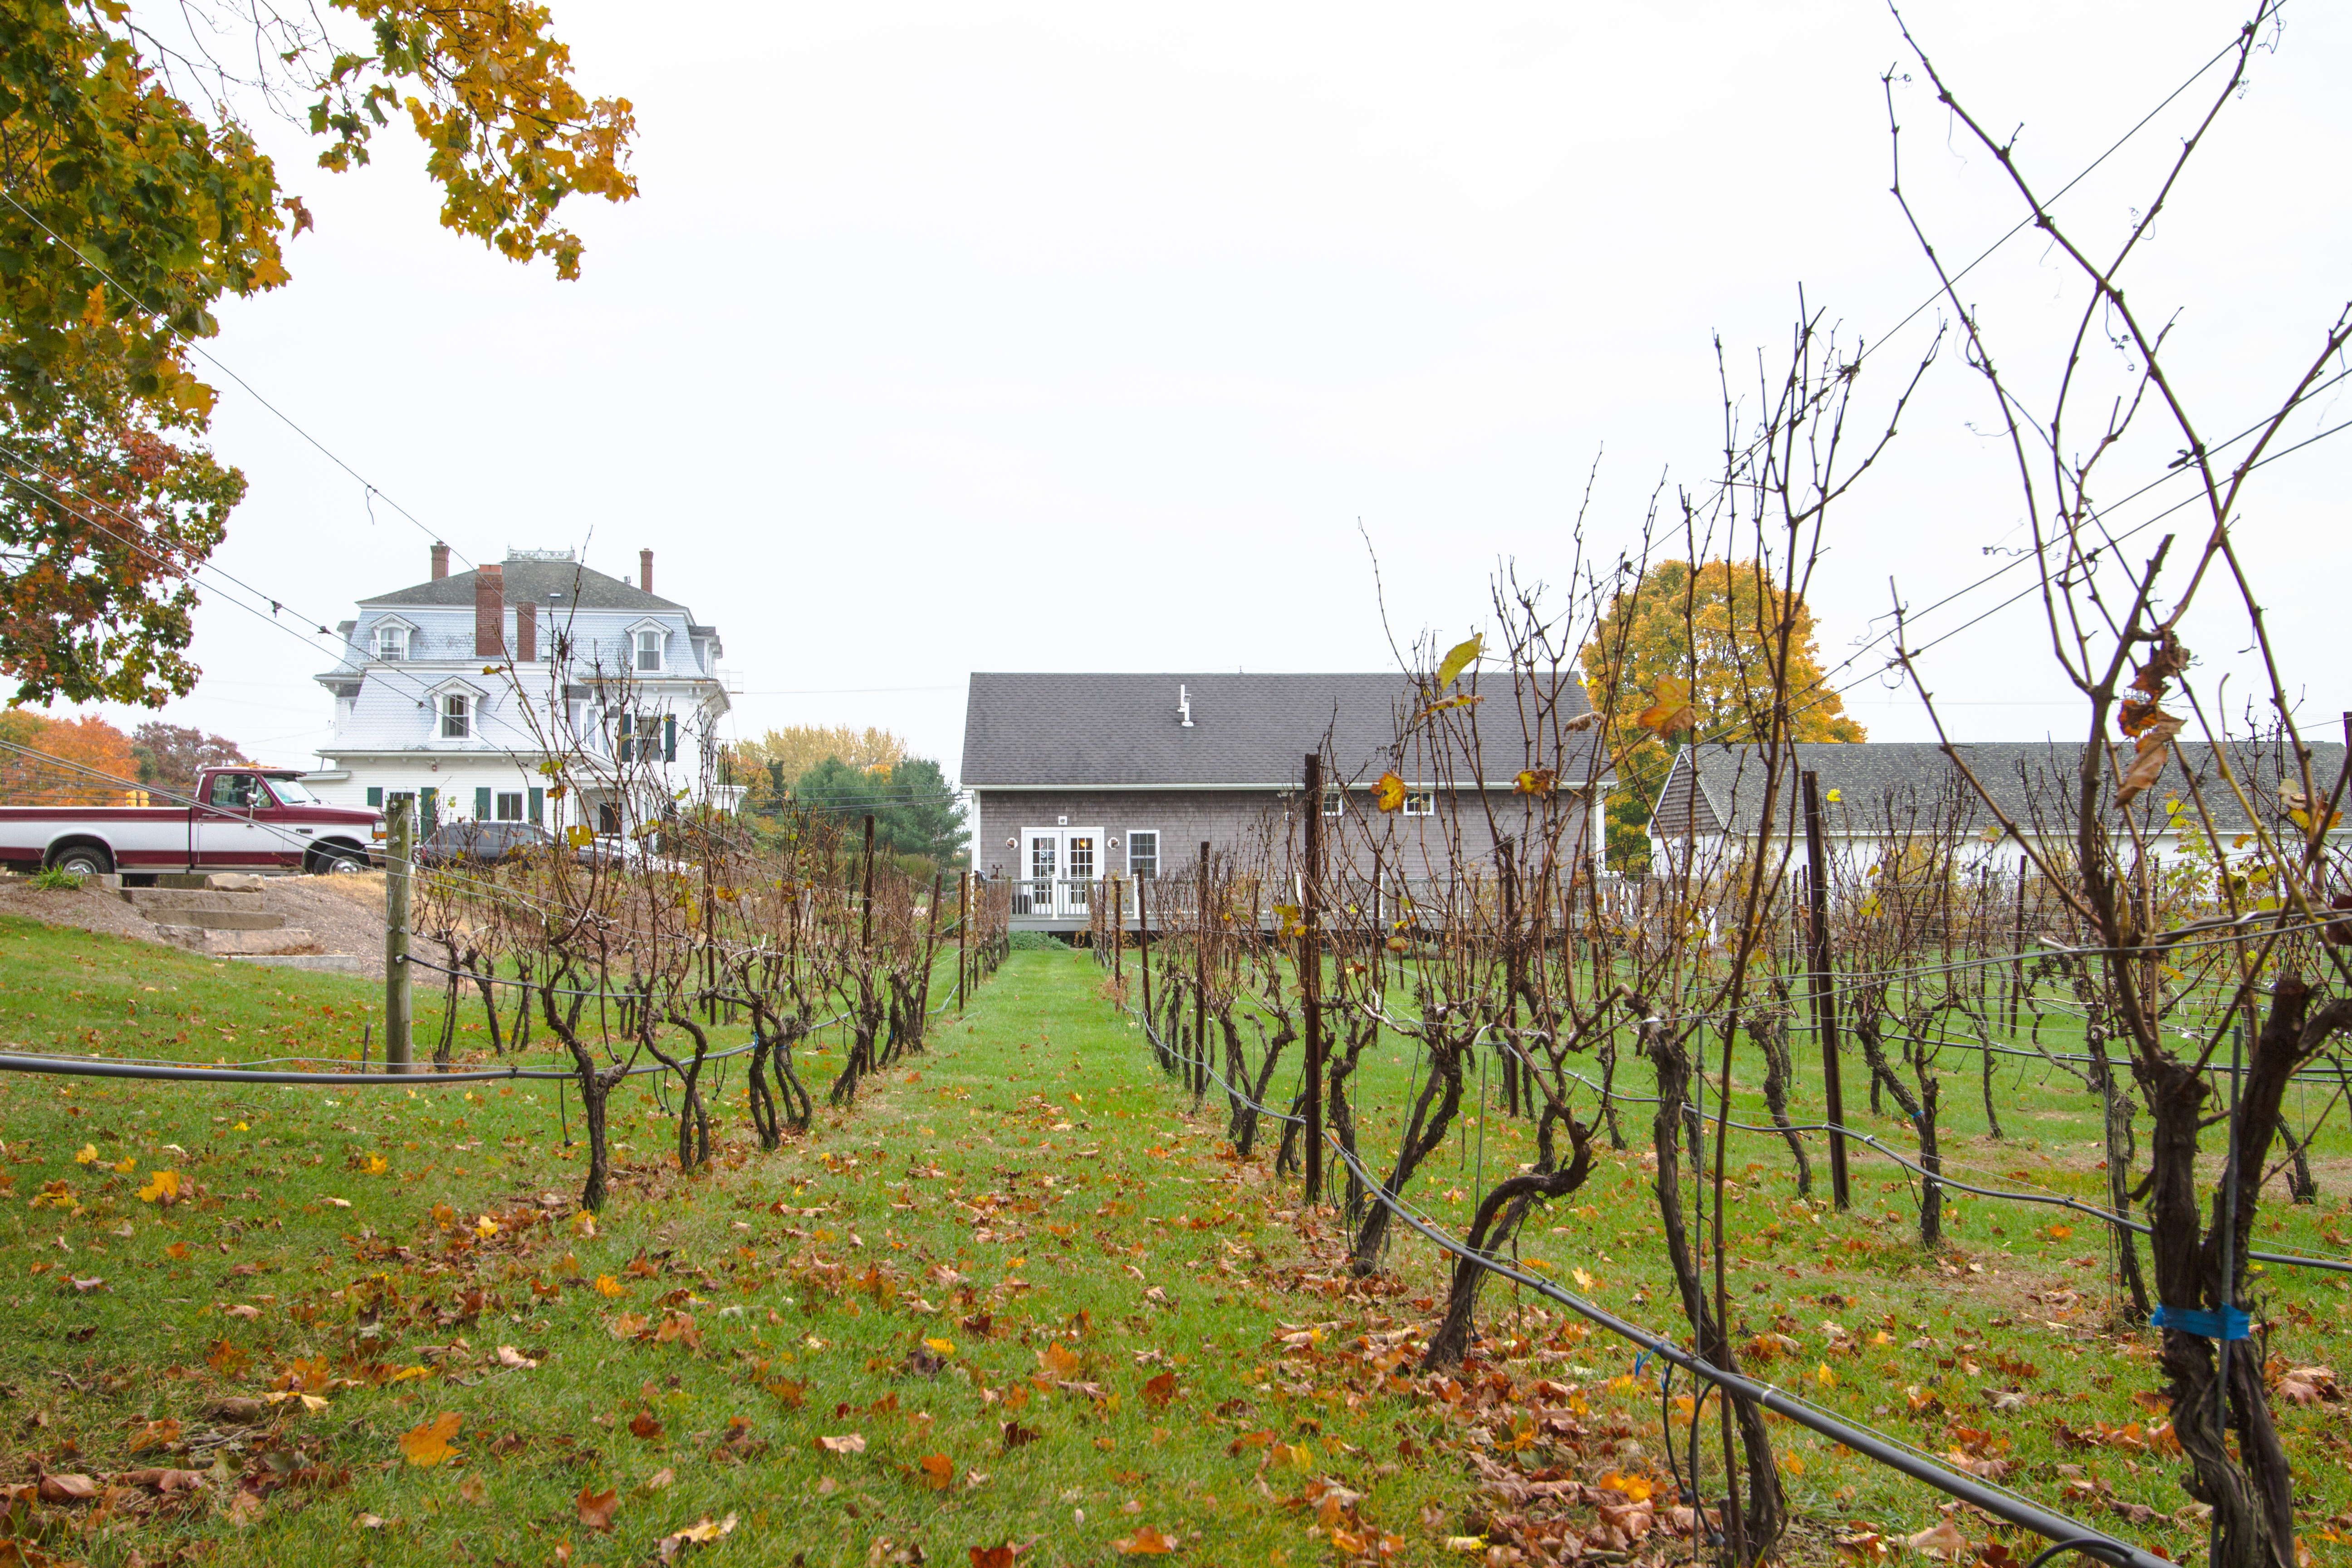 The Vineyard after harvest at Langworthy Farm Winery